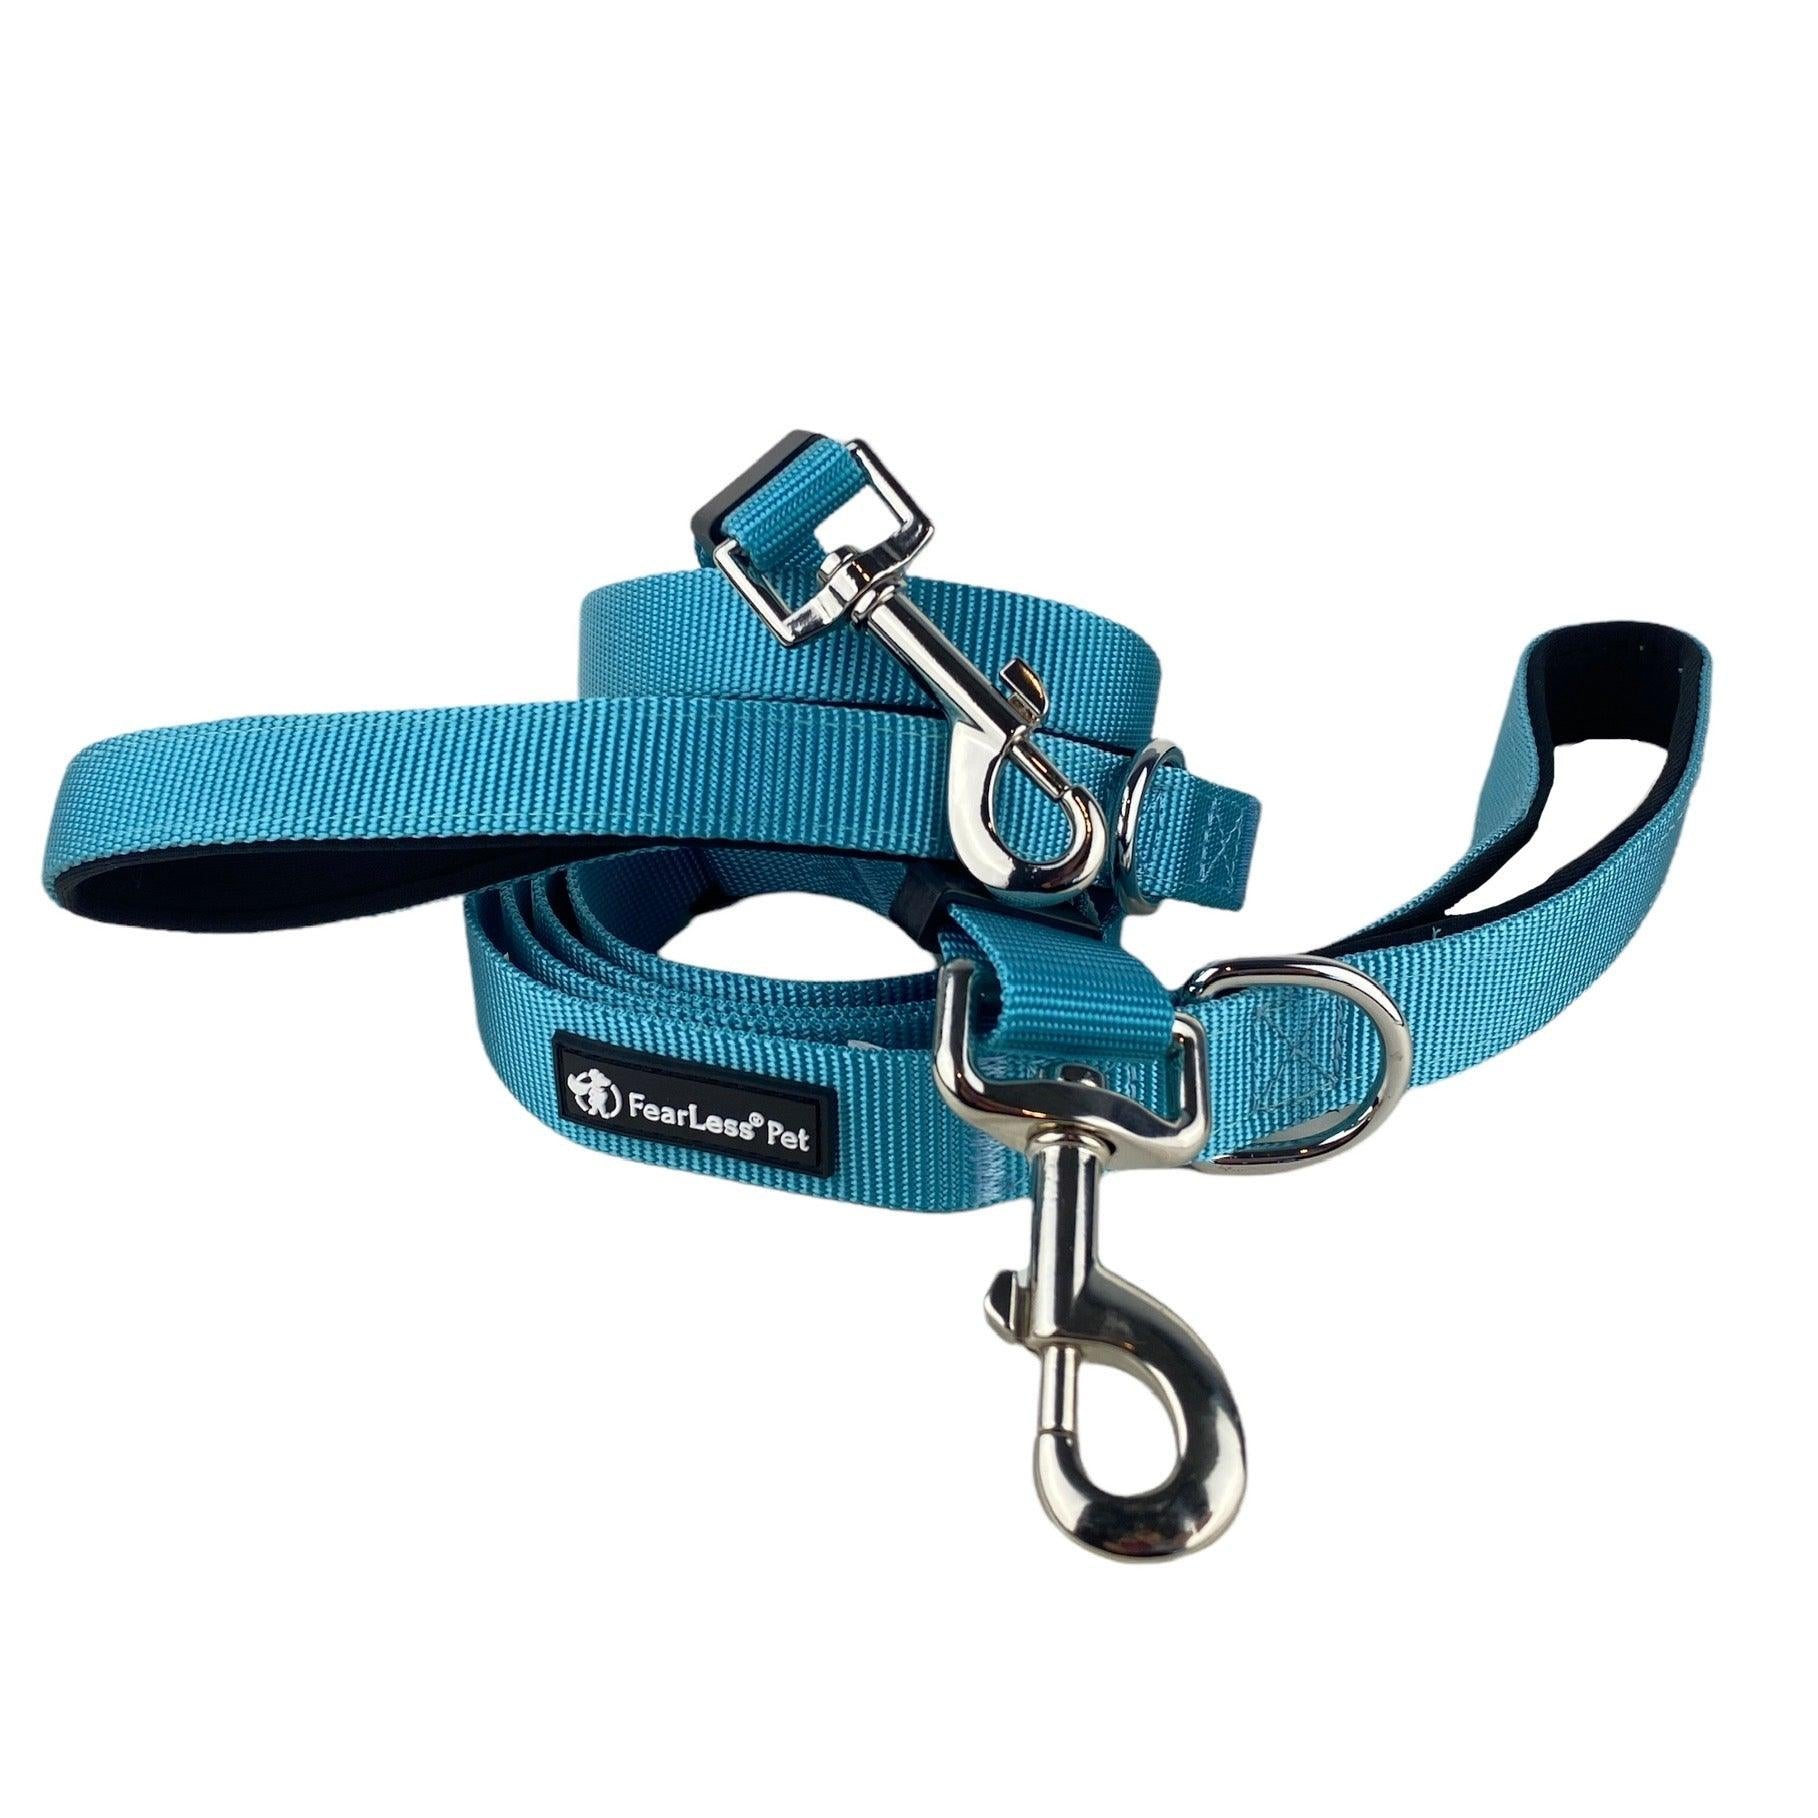 Adjustable Dog Leash 3-5.5 ft with Padded Handle - Teal Blue - FearLess Pet